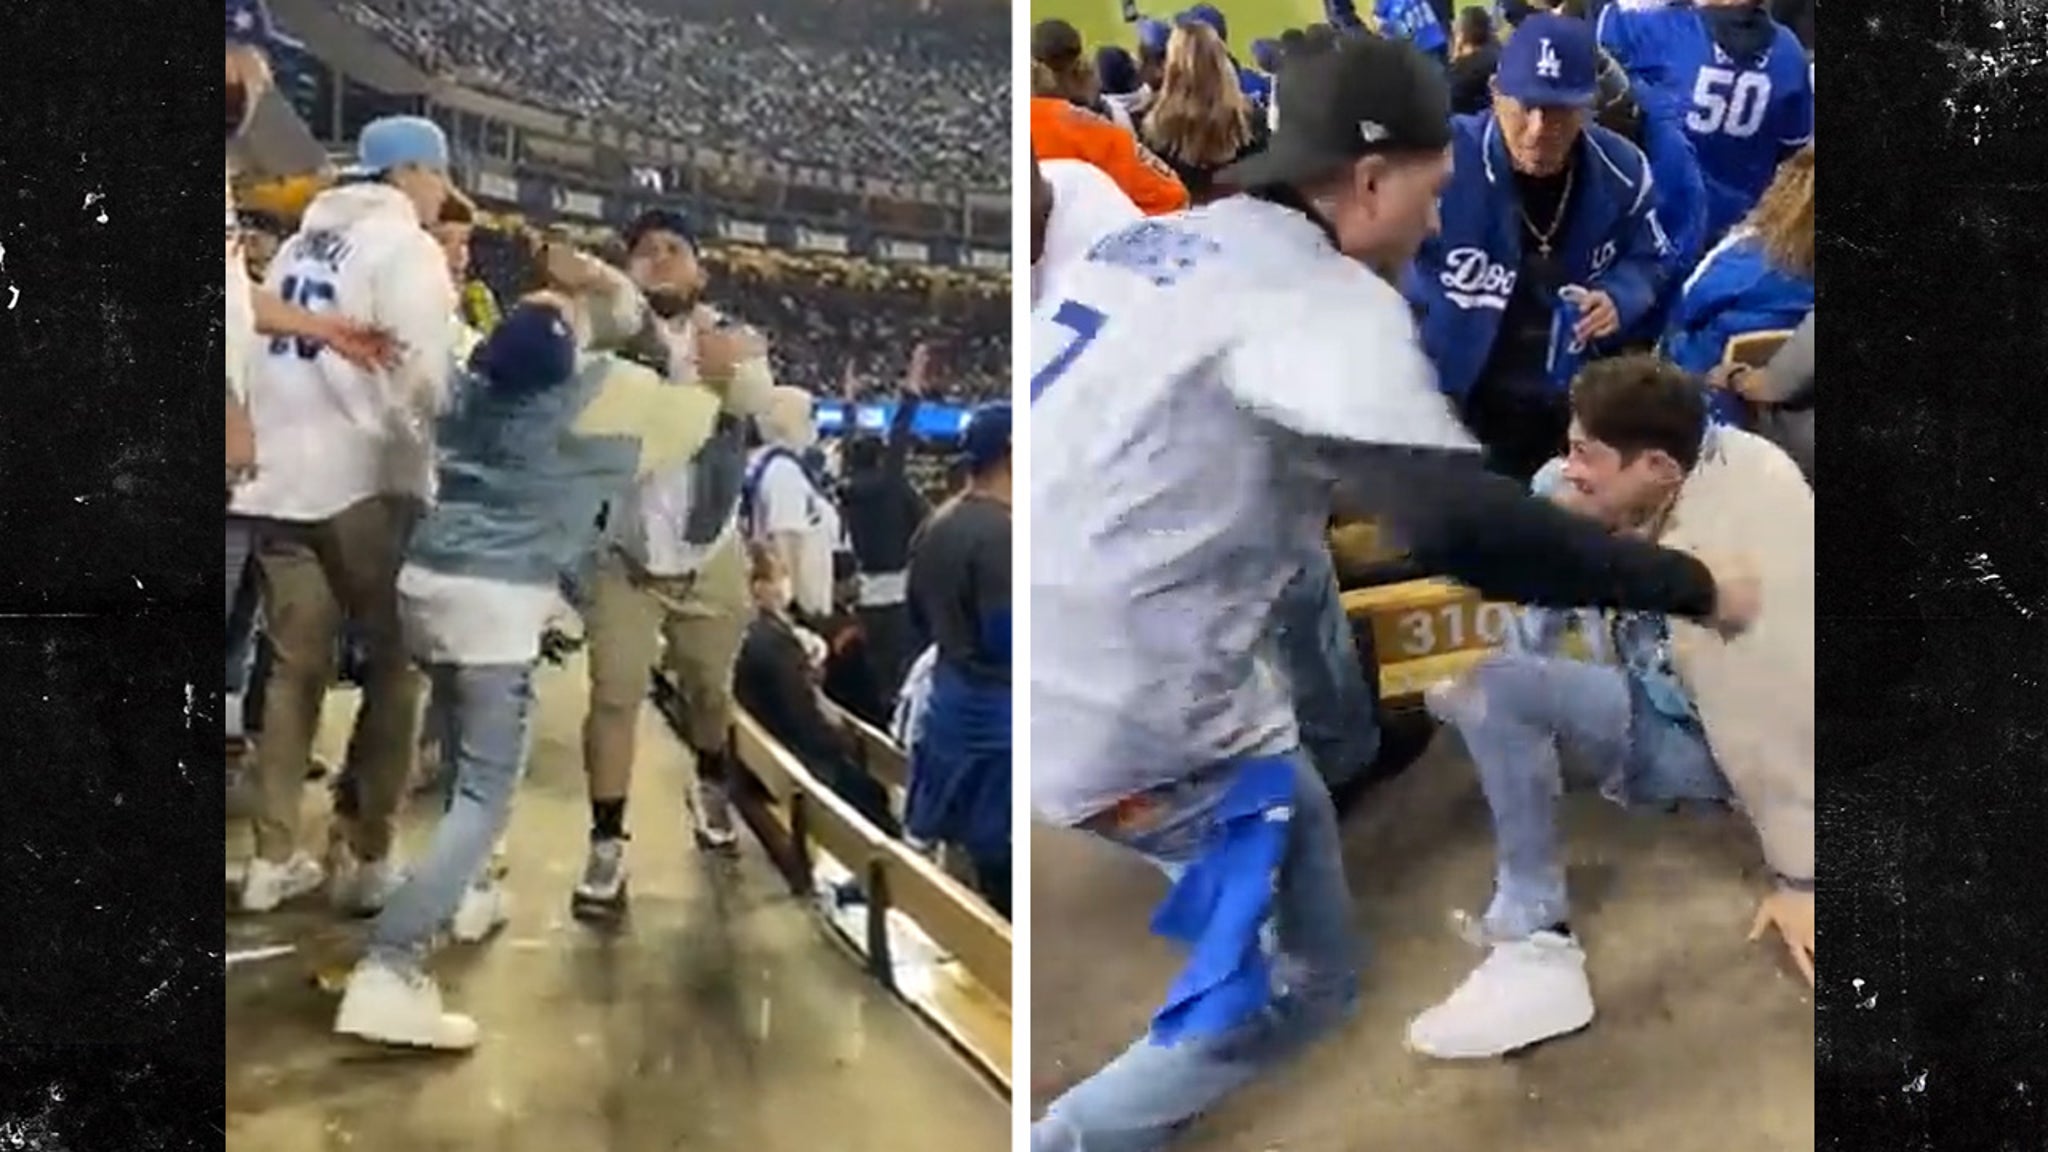 Yankees Fans Fight Each Other In Stands, Wild Haymakers Caught On